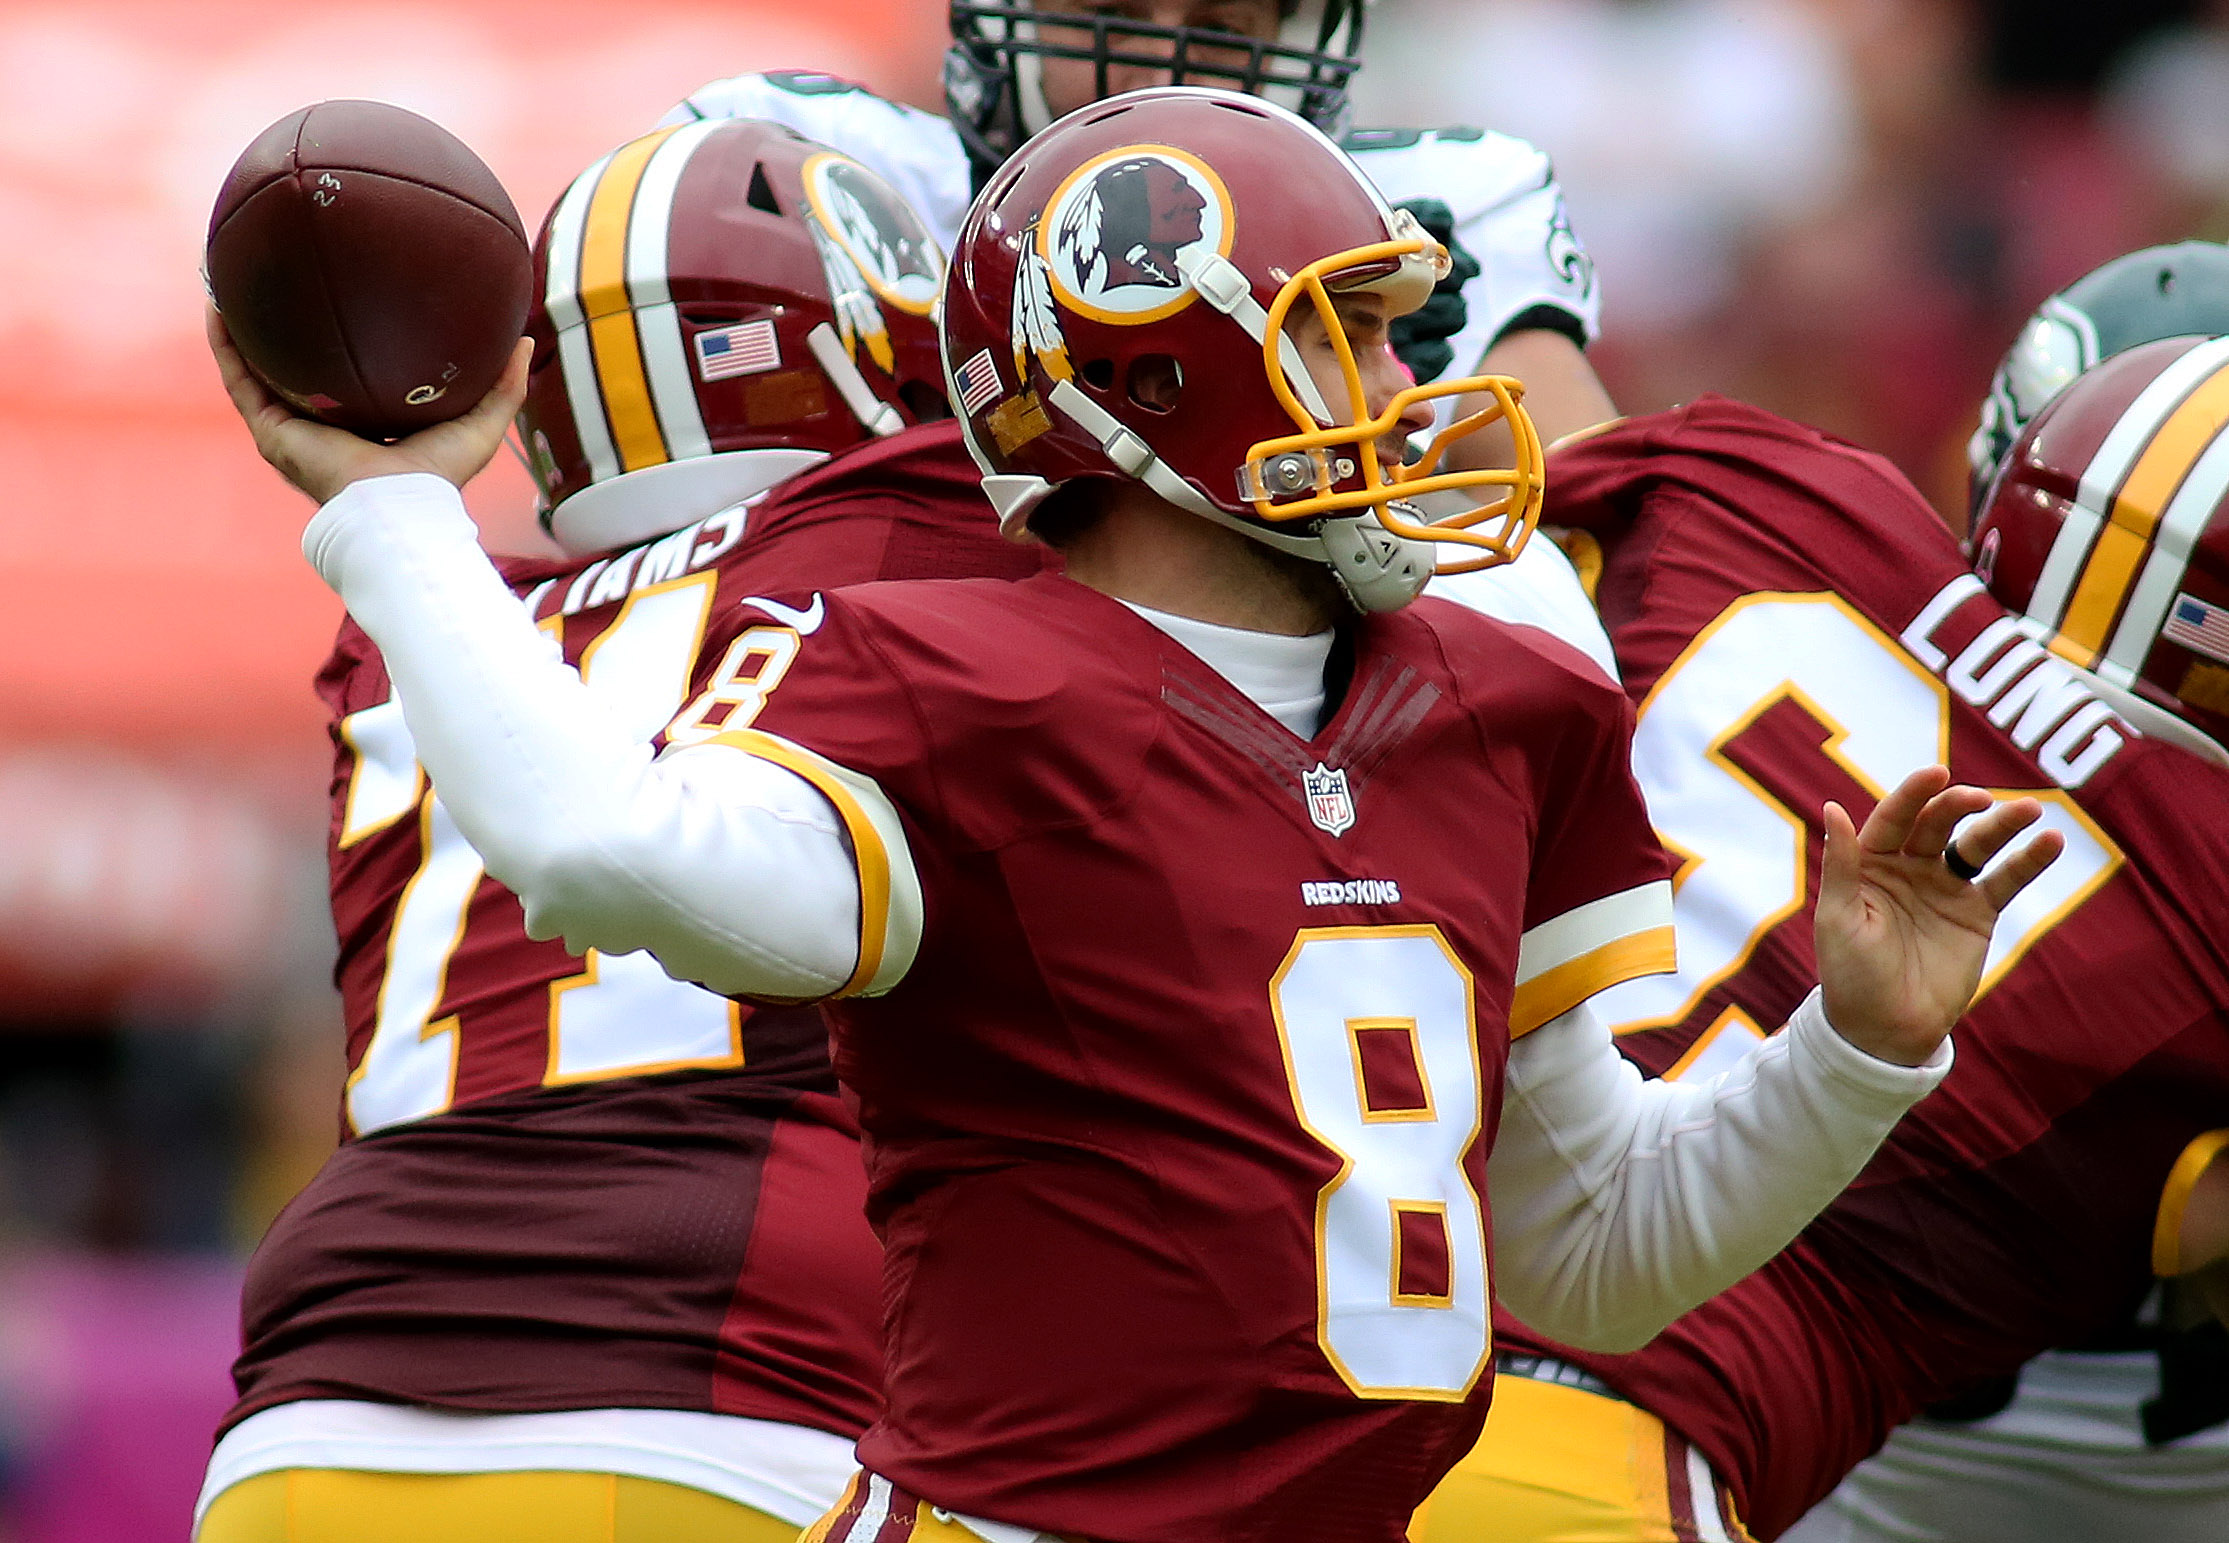 04 October, 2015: during a match between the Washington Redskins and the Philadelphia Eagles at FedEx Field in Landover, Maryland. (Photo By: Daniel Kucin Jr./Icon Sportswire)